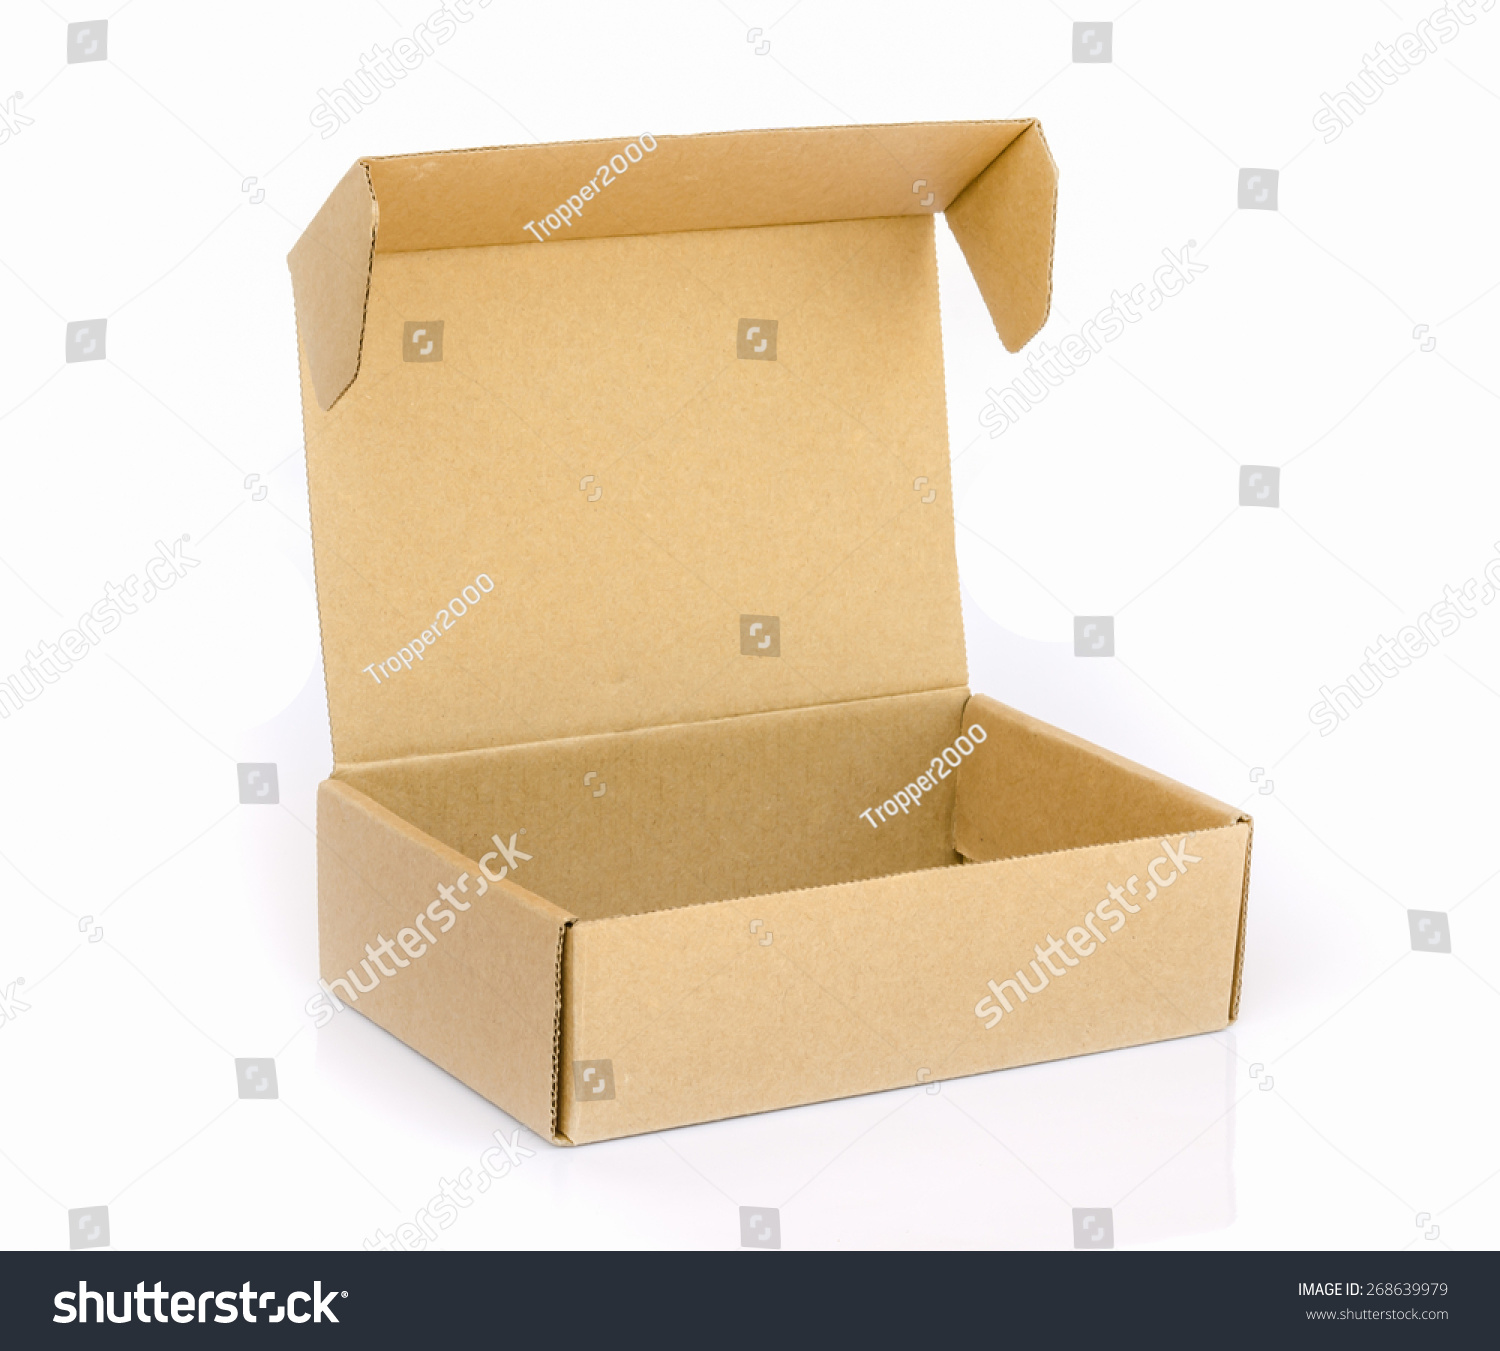 Cardboard Box Isolated On White Background Stock Photo (Edit Now